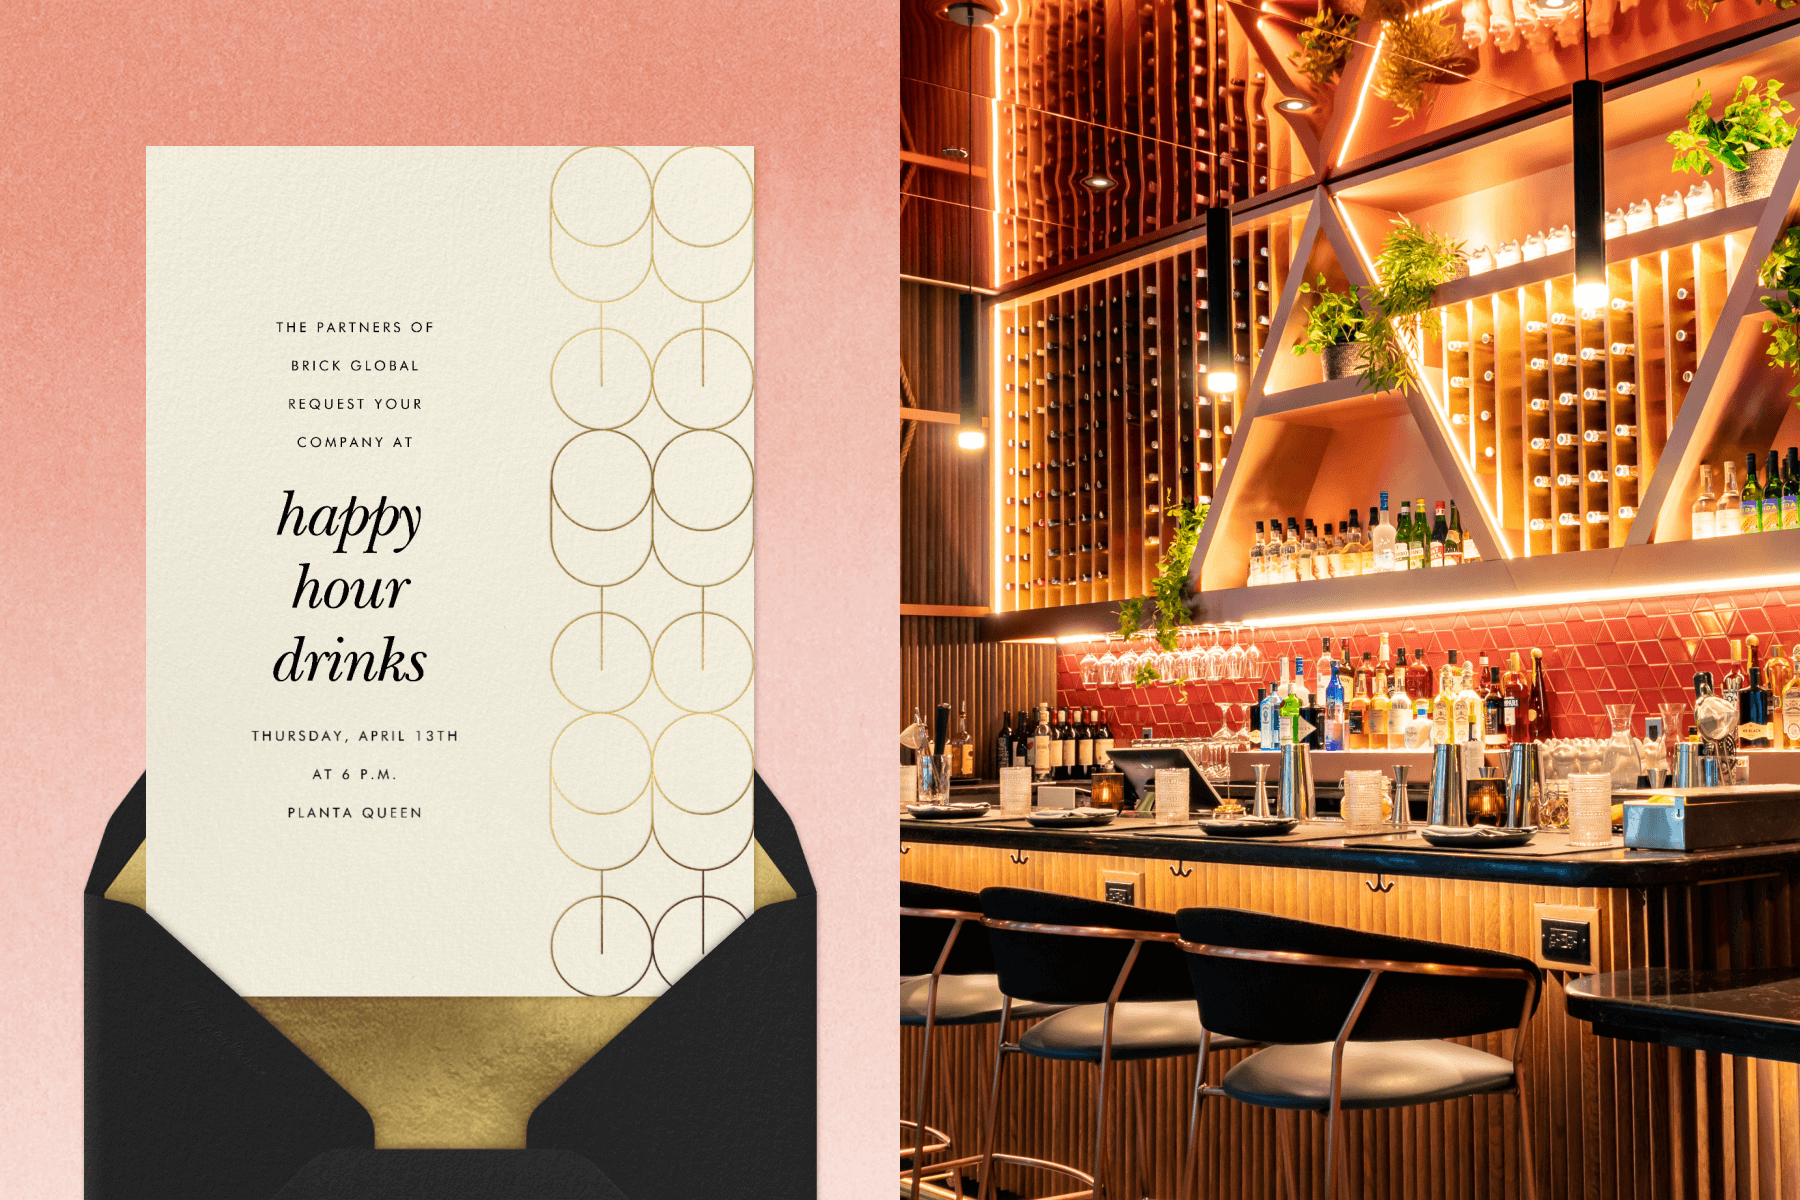 Left: An invitation for “happy hour drinks with simplified illustrations of stemmed wine glasses on the right and a black envelope with gold liner. Right: A dimly lit bar with modern shelves above the bar filled with wine bottles and fern plants.